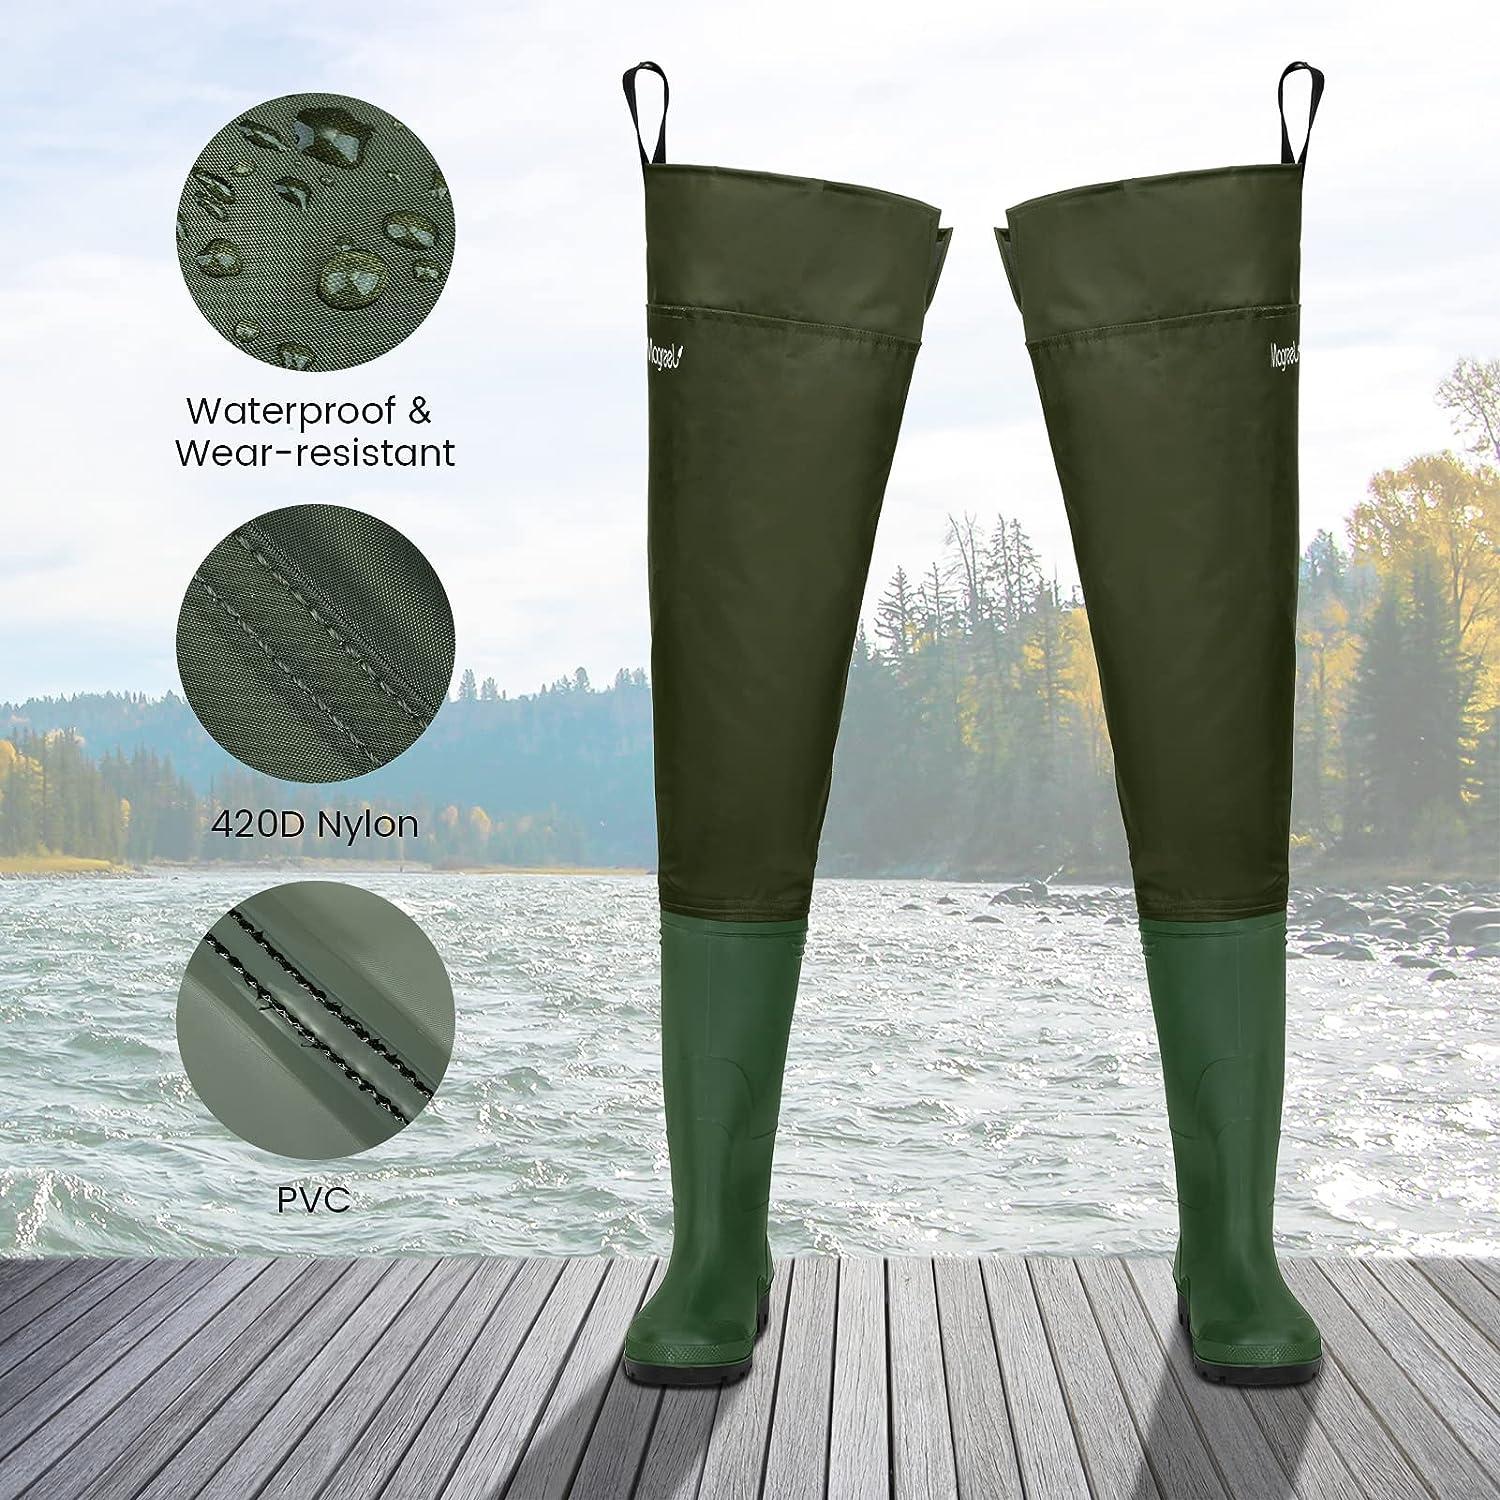 Magreel Chest Waders Breathable Waterproof Fishing & Hunting